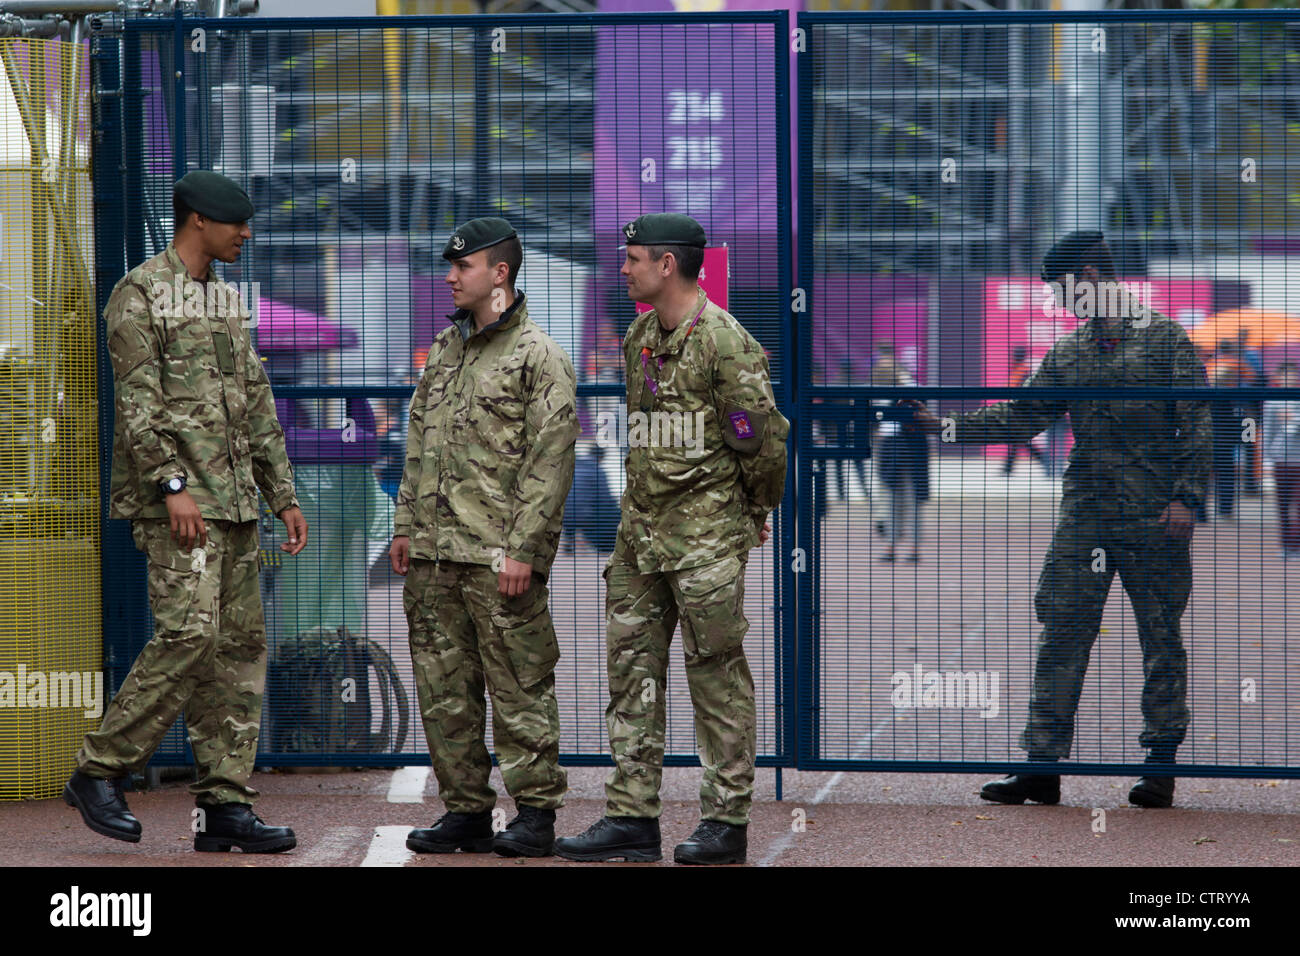 Soldiers of the Rifles regiment in the British army stand guarding the entrance to the volleyball venue in central London next to the IOC rings logo on day 4 of the London 2012 Olympic Games. A further 1,200 military personnel are being deployed to help secure the 2012 Olympics in London following the failure by security contractor G4S to provide enough private guards. The extra personnel have been drafted in amid continuing fears that the private security contractor's handling of the £284m contract remains a risk to the Games. Stock Photo